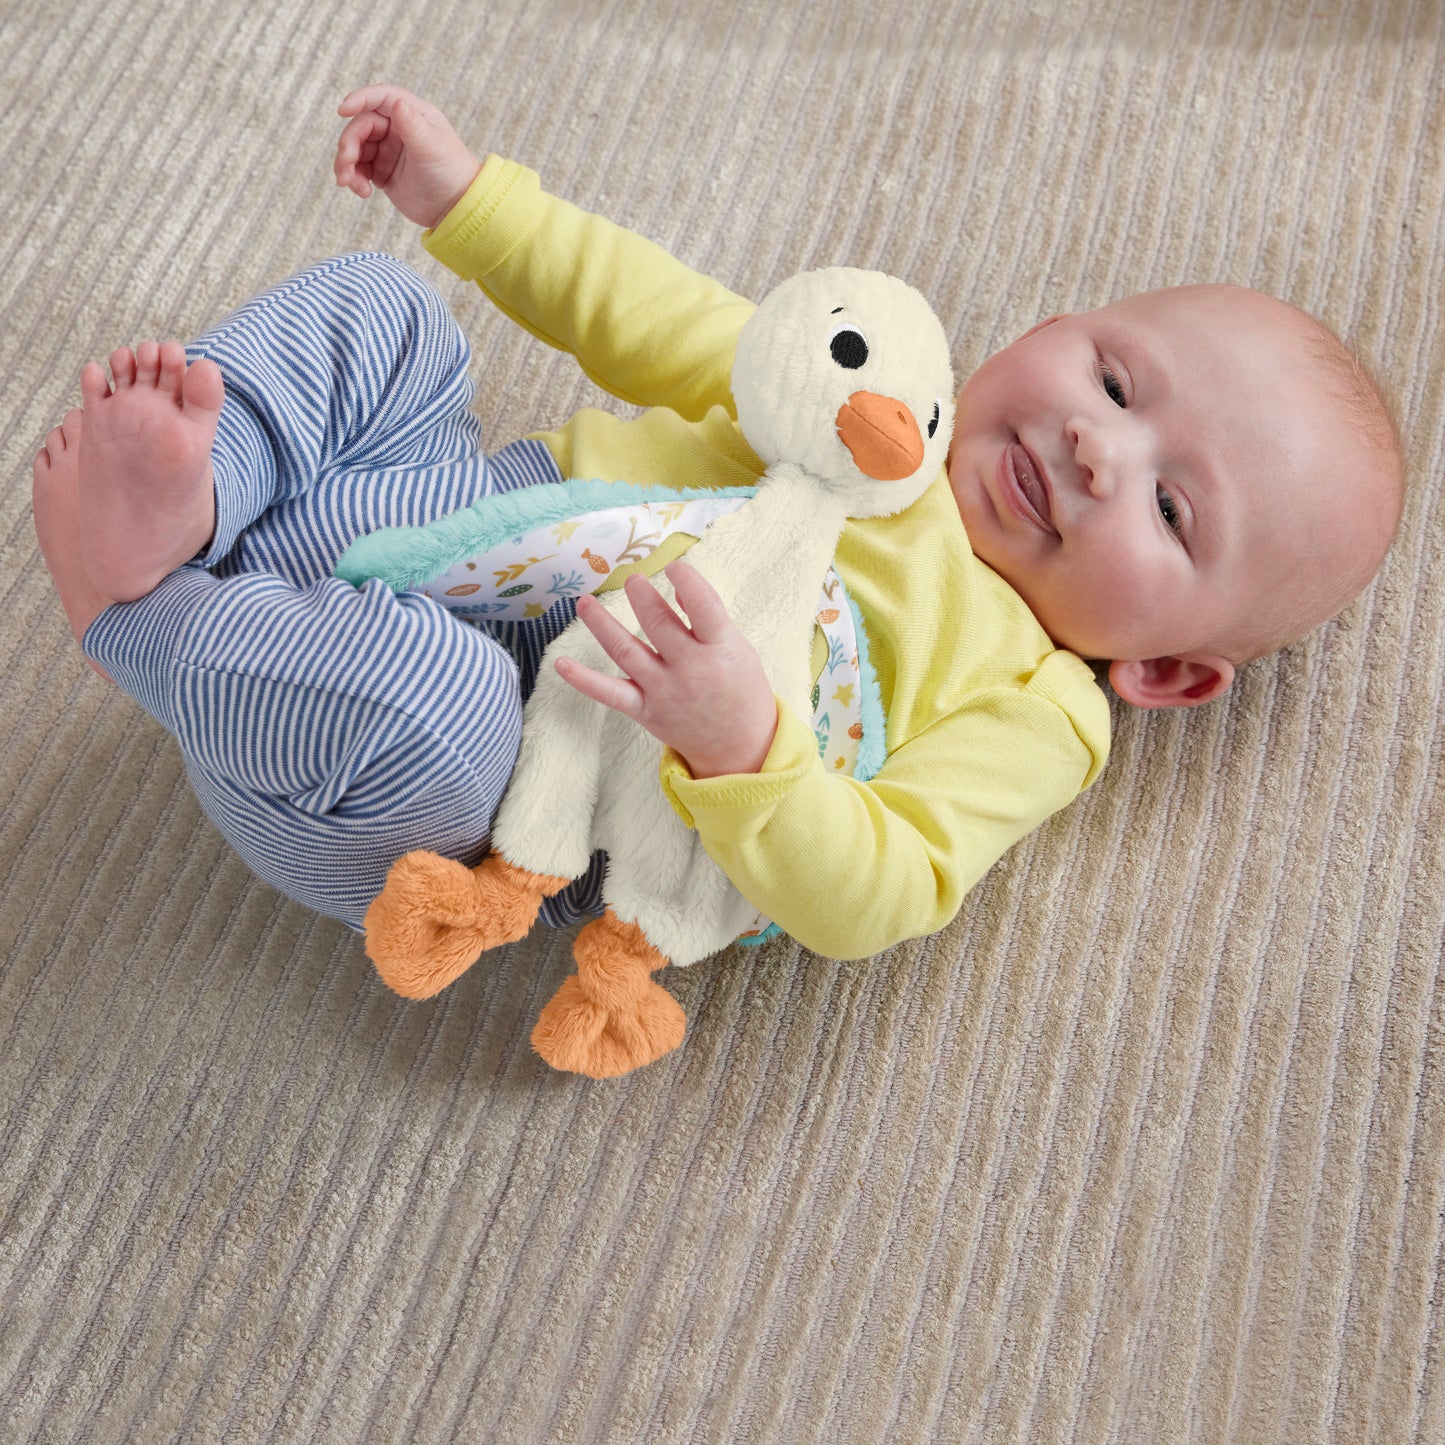 Fisher-Price Snuggle Up Goose